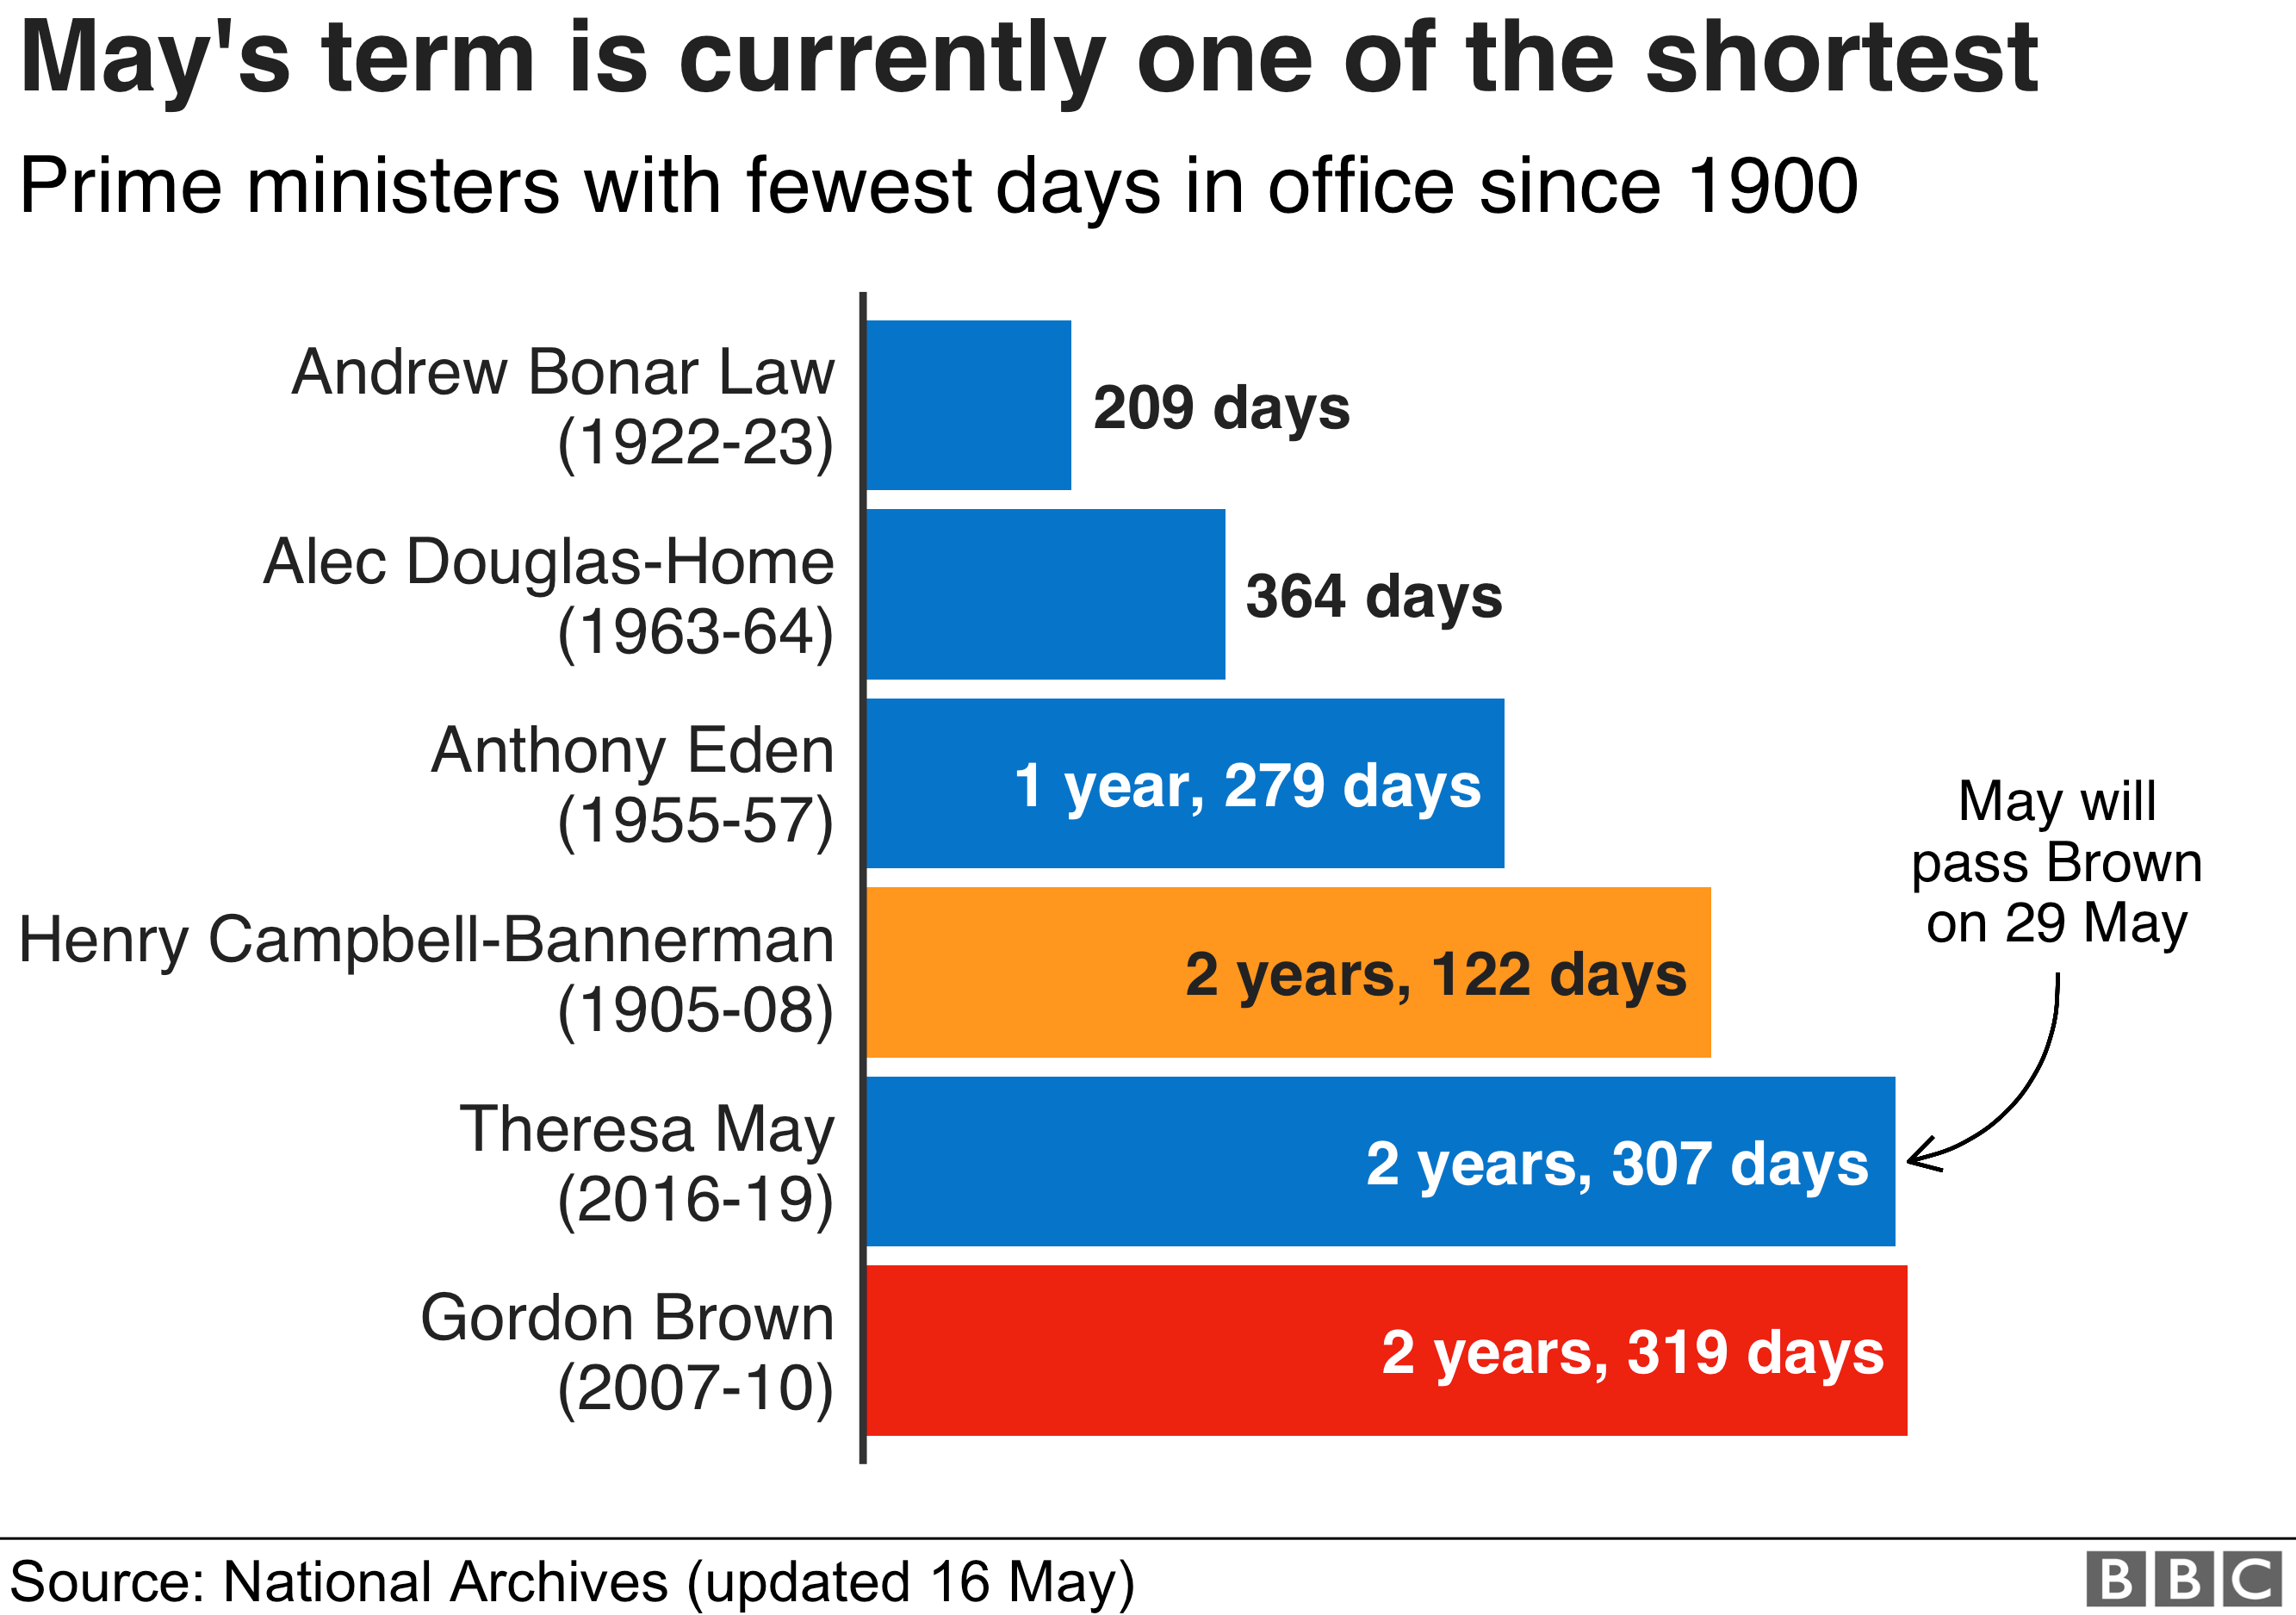 A chart showing that Theresa May's term is currently one of the shortest